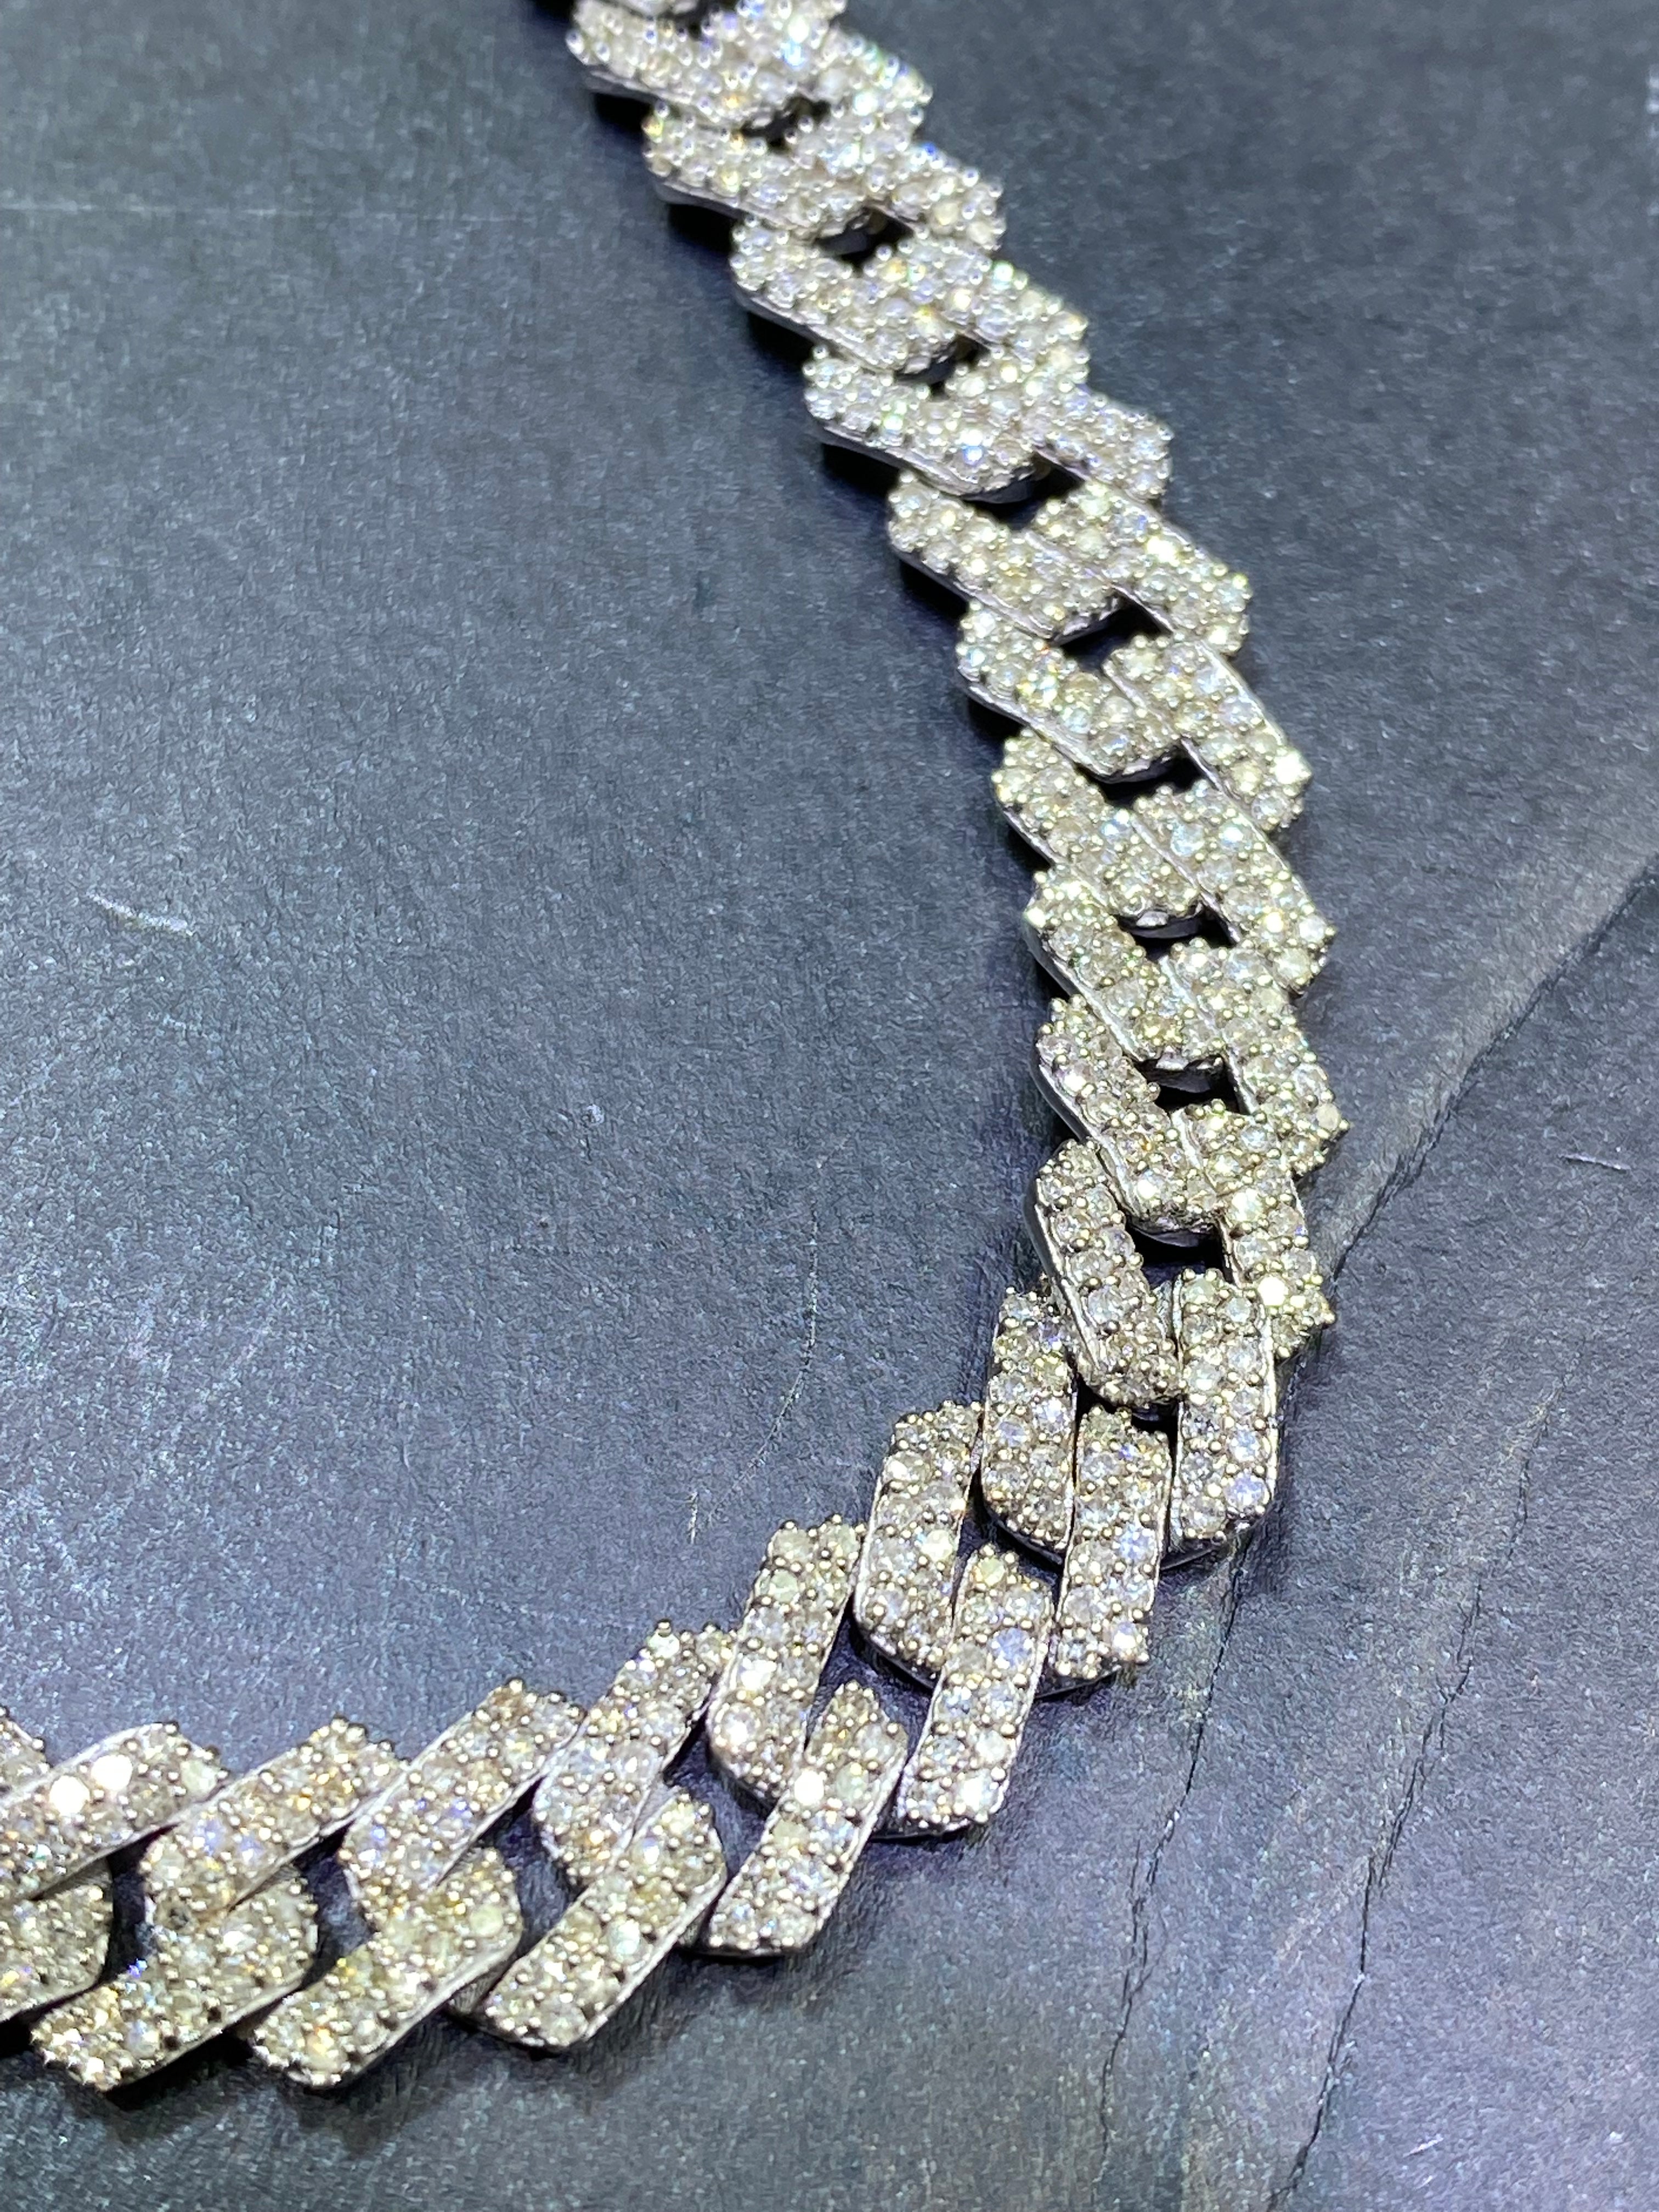 vs1 "iced bust down cuban link" chain 10 cts t.w. 14k gold 60 grams made here at renee de paris jewelry for sale online on google